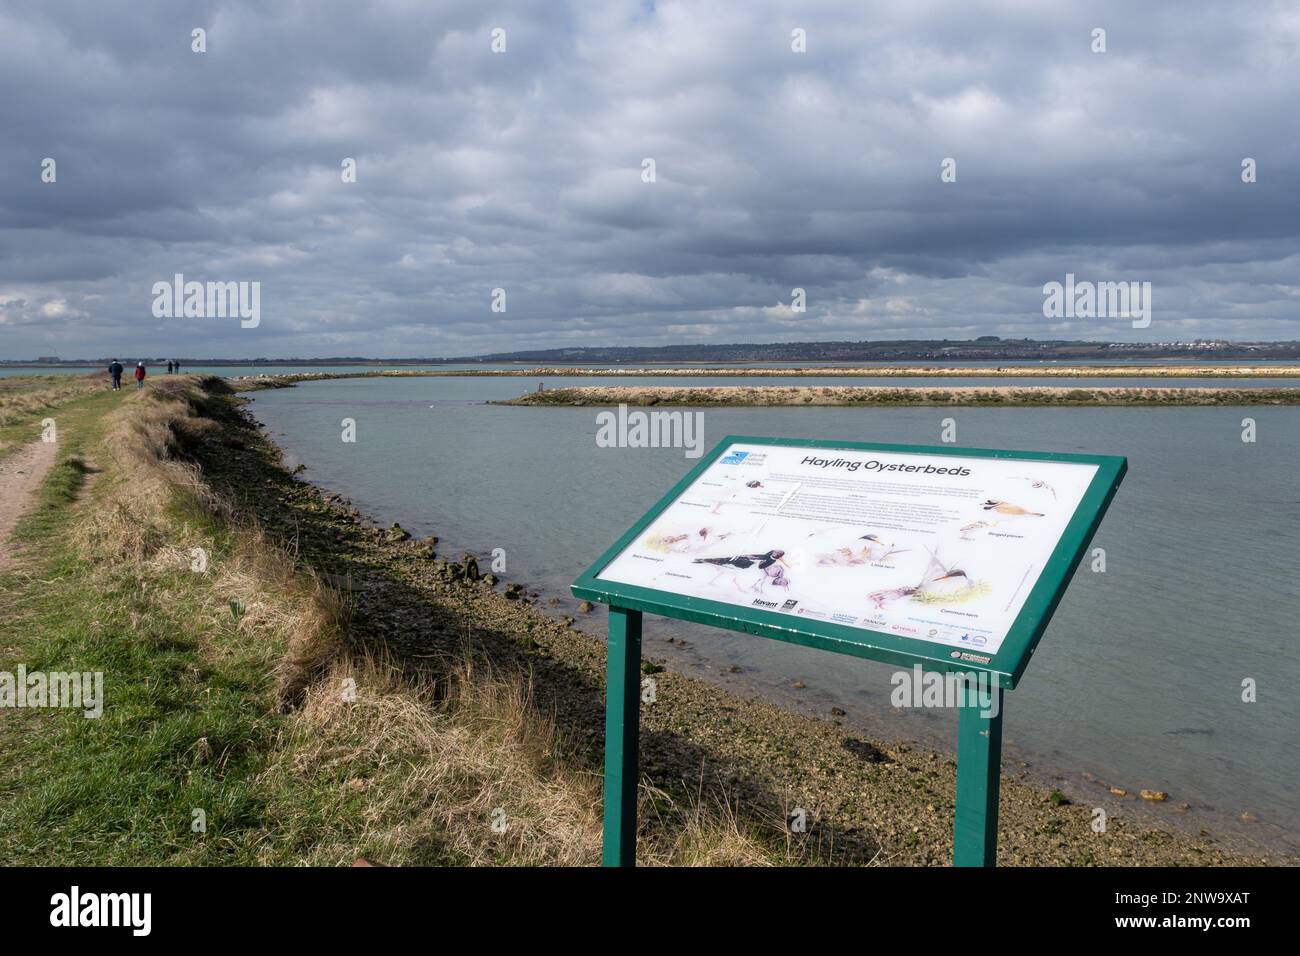 Hayling Island Oyster Beds, information board at the nature reserve, Hampshire, England, UK Stock Photo